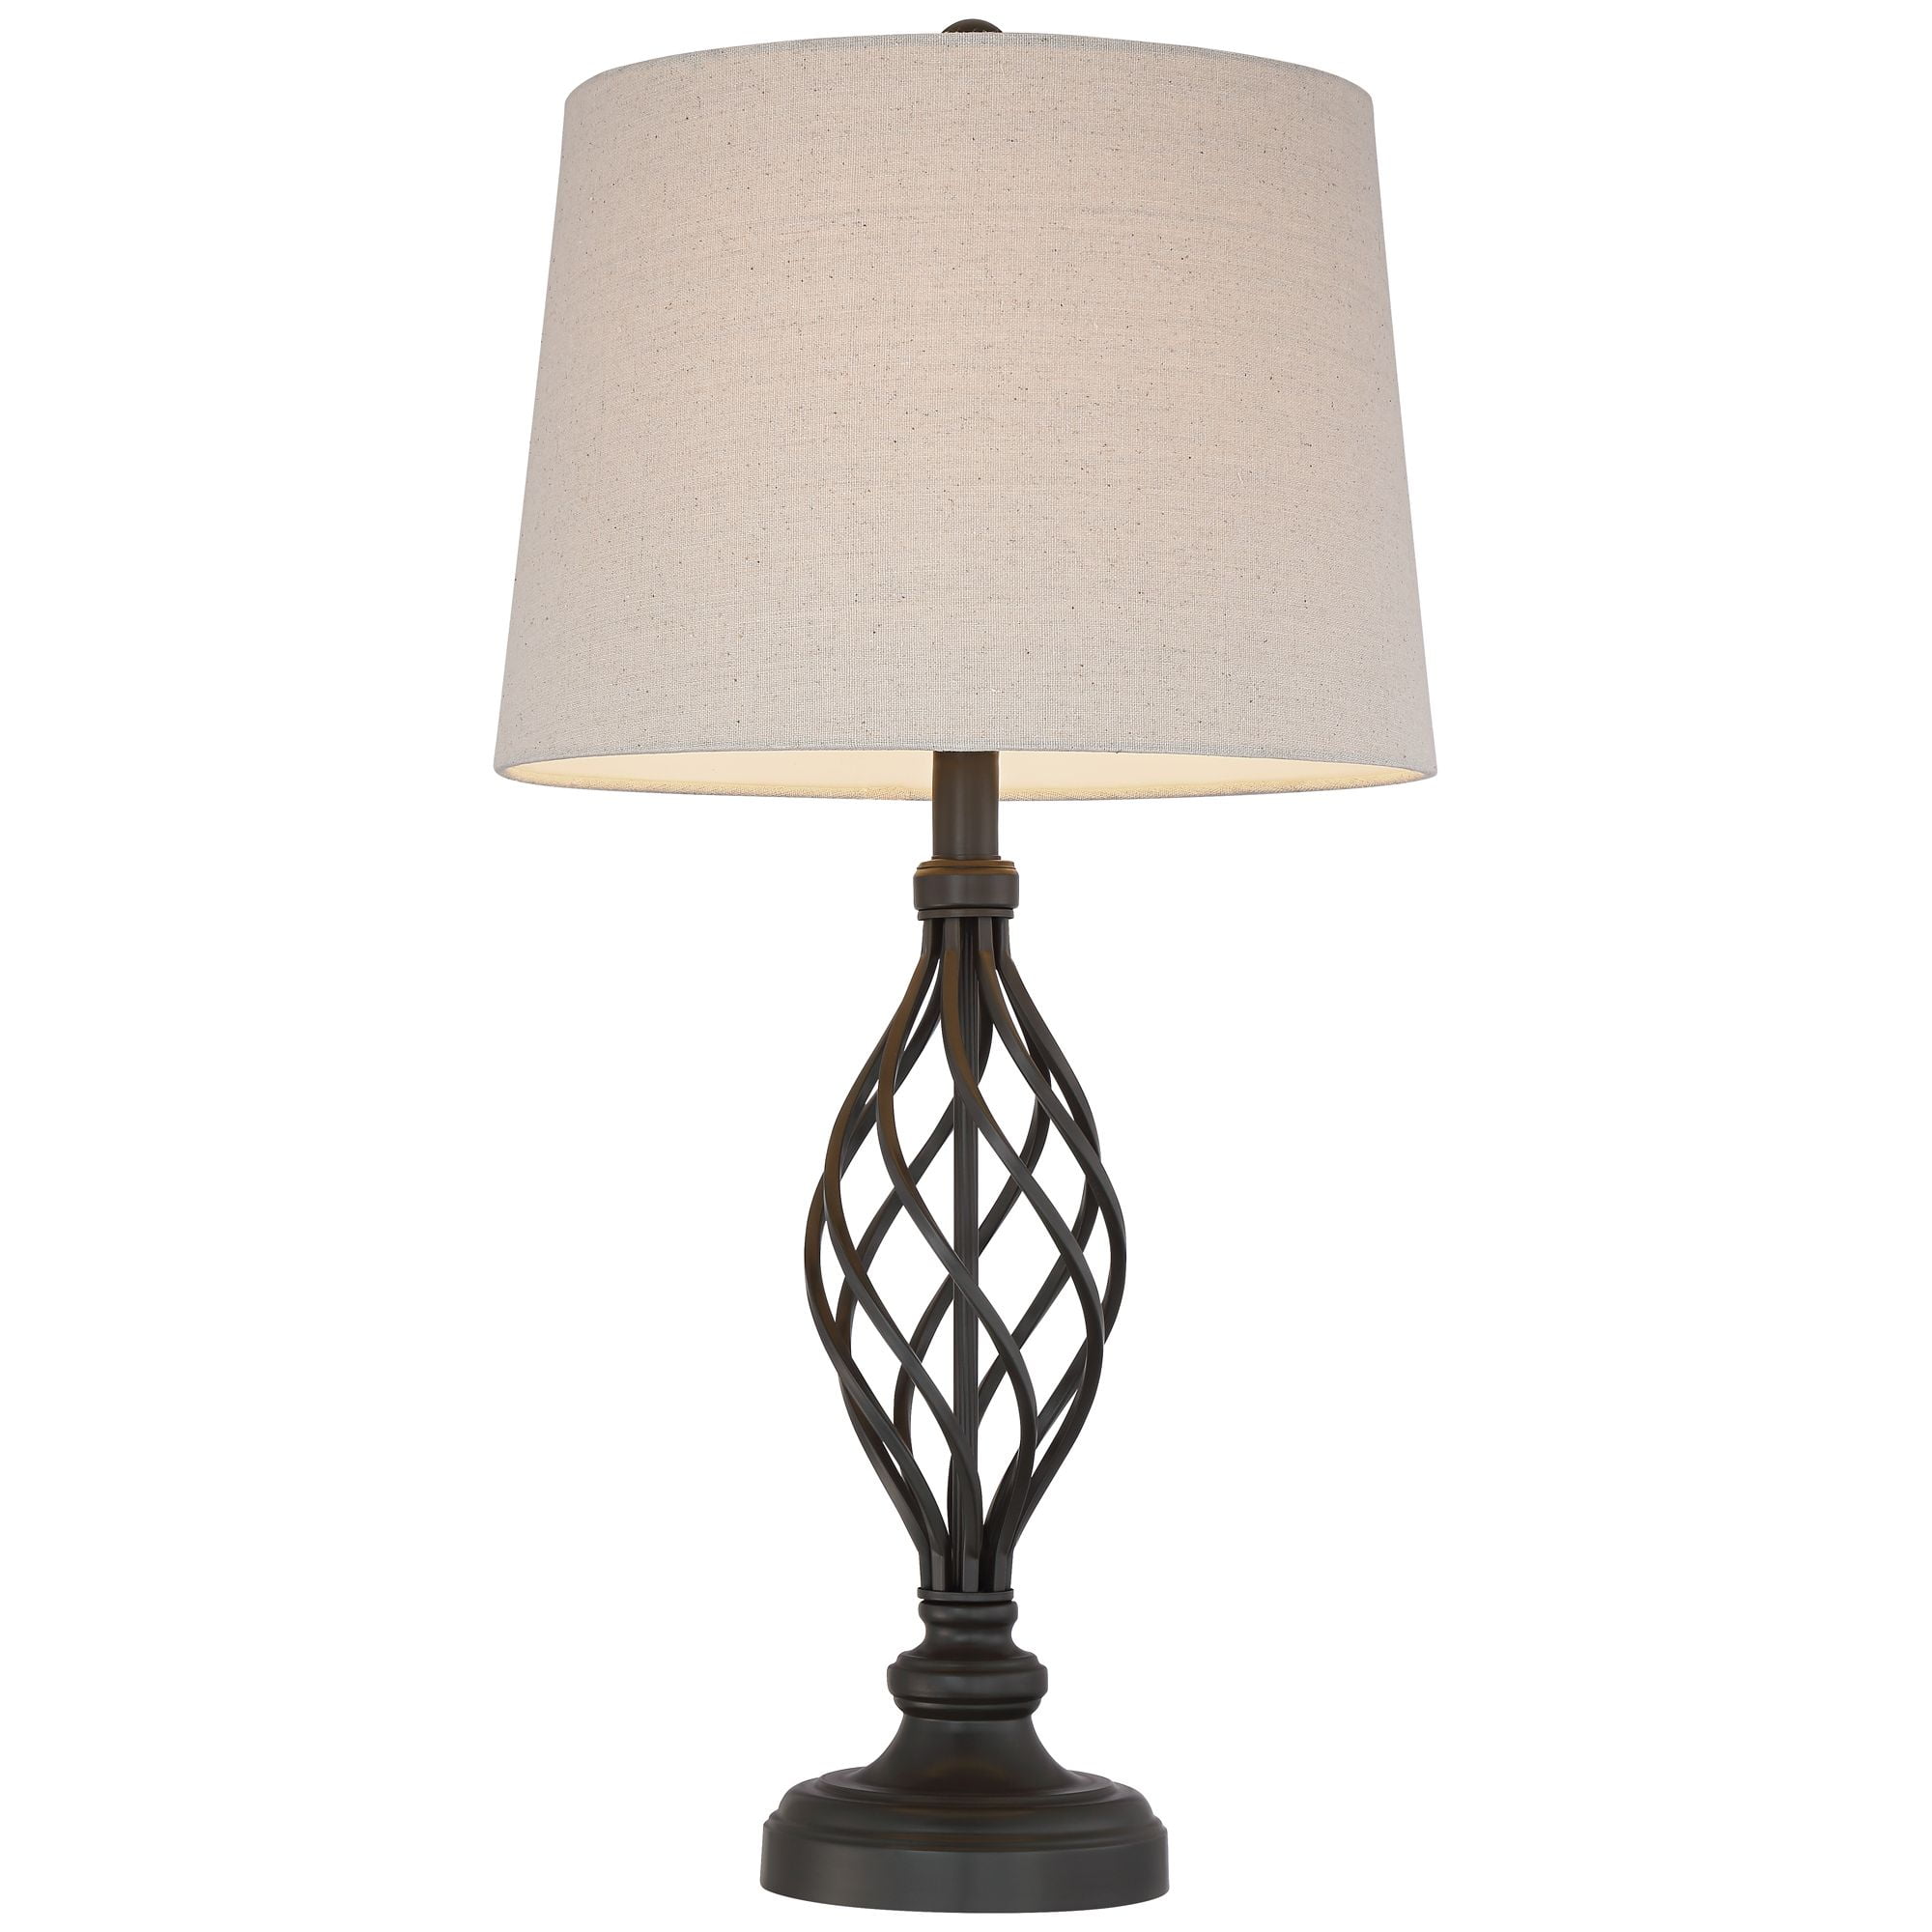 Franklin Iron Works Traditional Table, Transitional Bedside Table Lamps